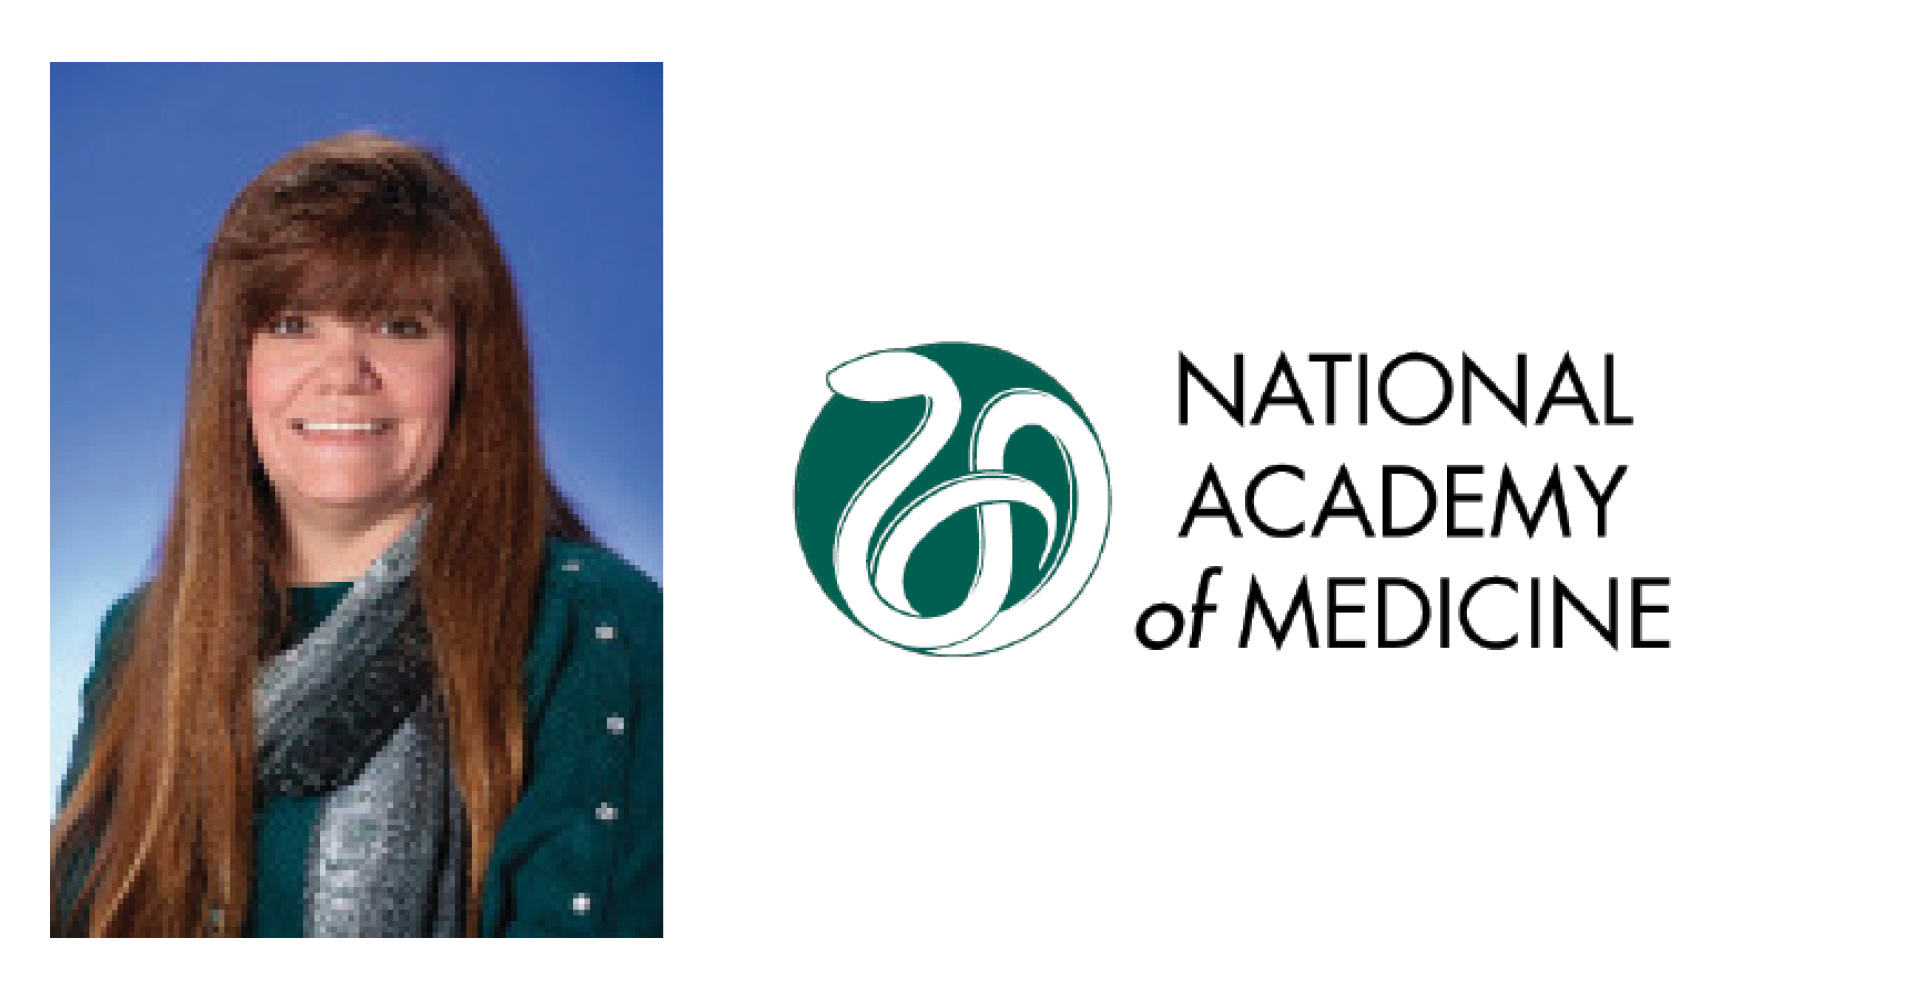 MetroHealth Researcher Named to National Academy of Medicine